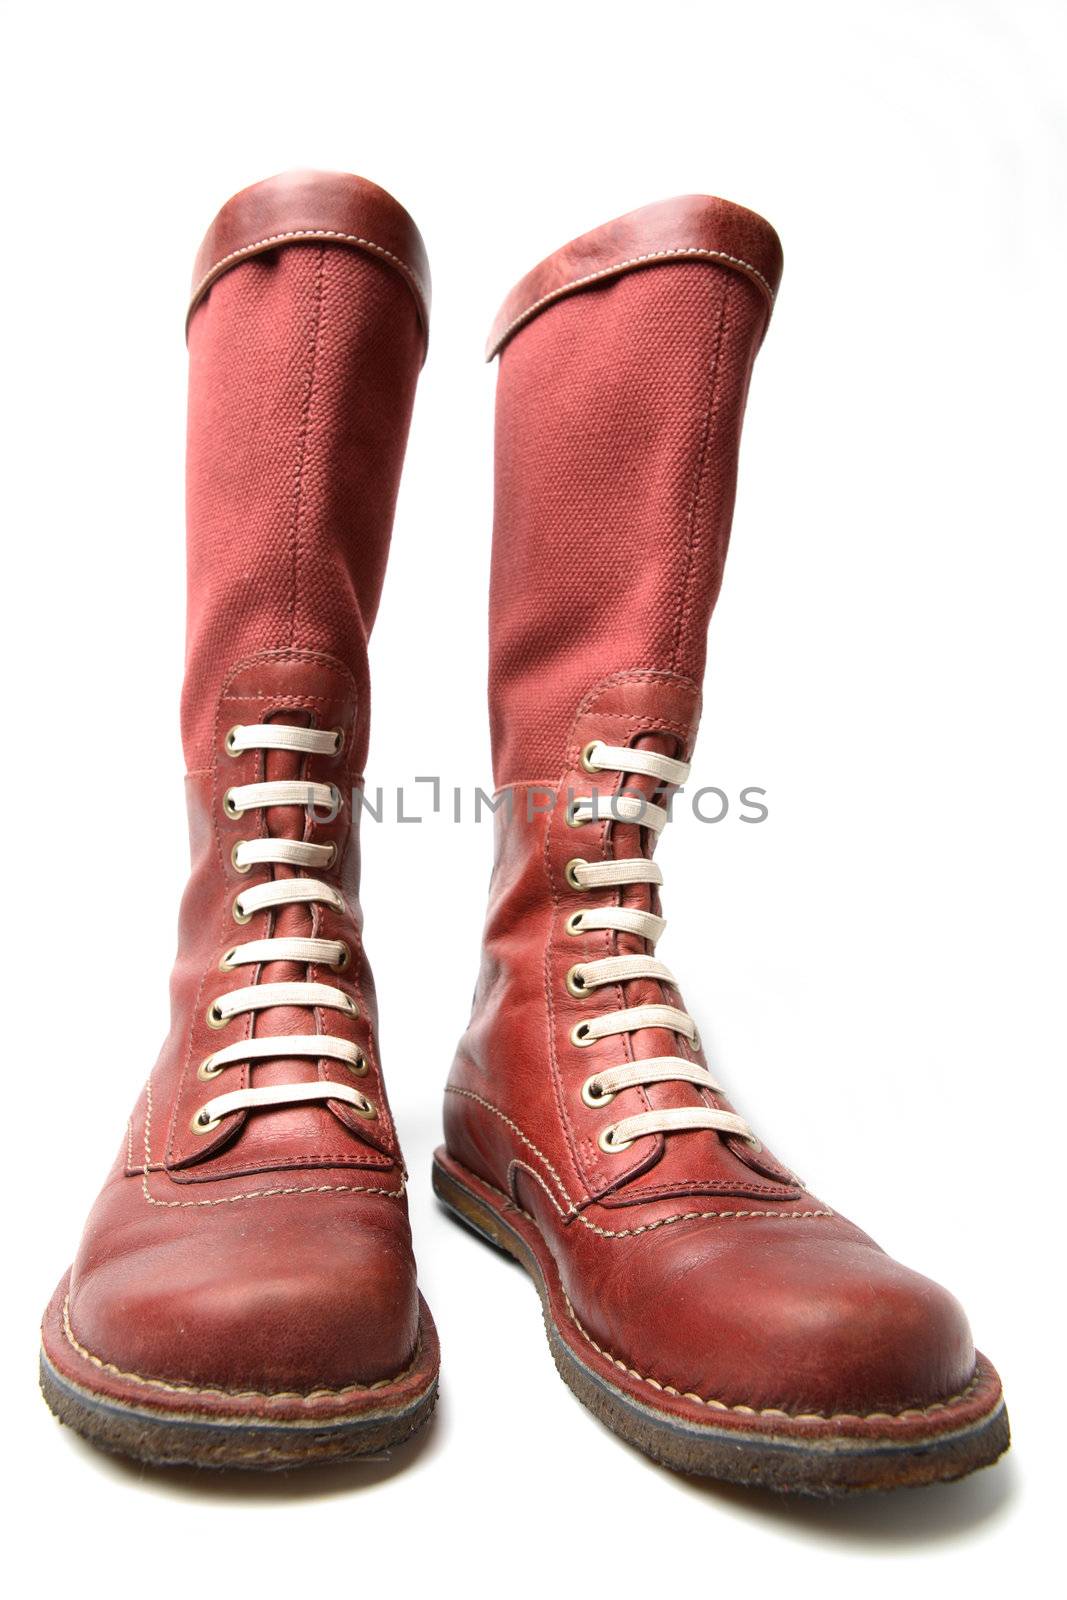 Footwear, Old Red Boots by Astroid